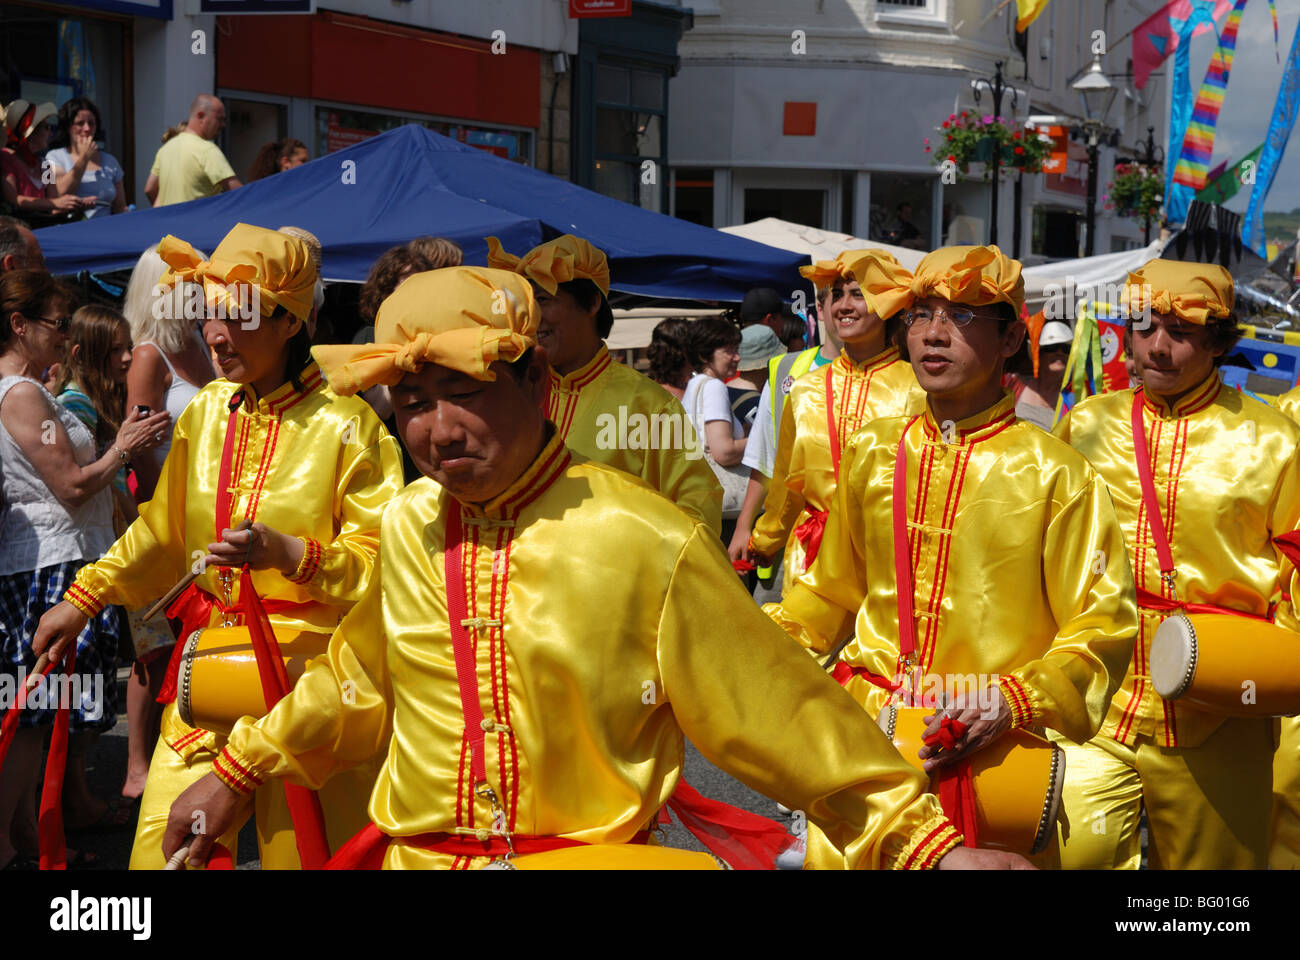 members of the ancient chinese culture ' falun gong ' march through the streets of penzance in cornwall, uk Stock Photo